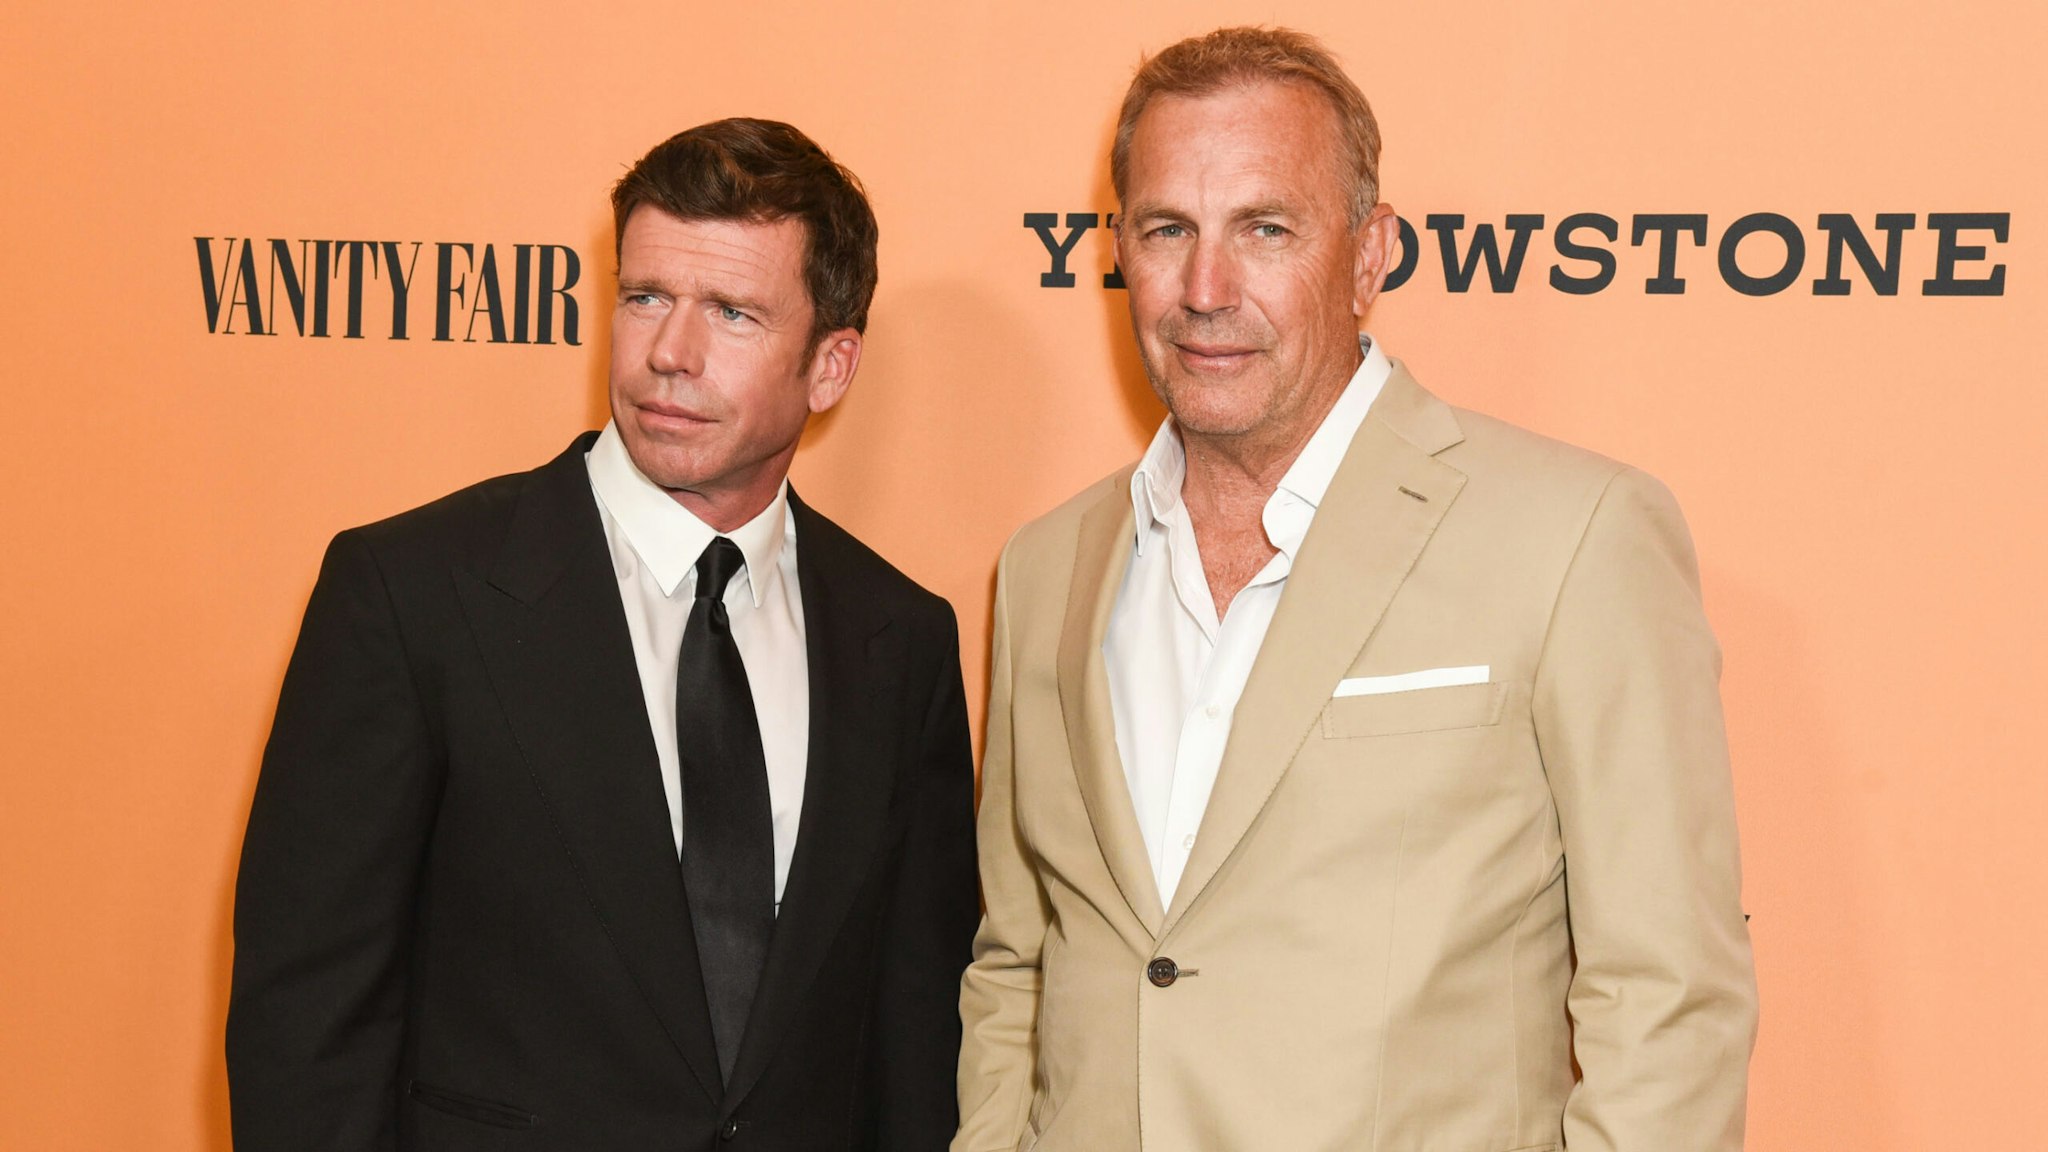 HOLLYWOOD, CA - JUNE 11: Taylor Sheridan and Kevin Costner attend the premiere of Paramount Pictures' "Yellowstone" at Paramount Studios on June 11, 2018 in Hollywood, California.